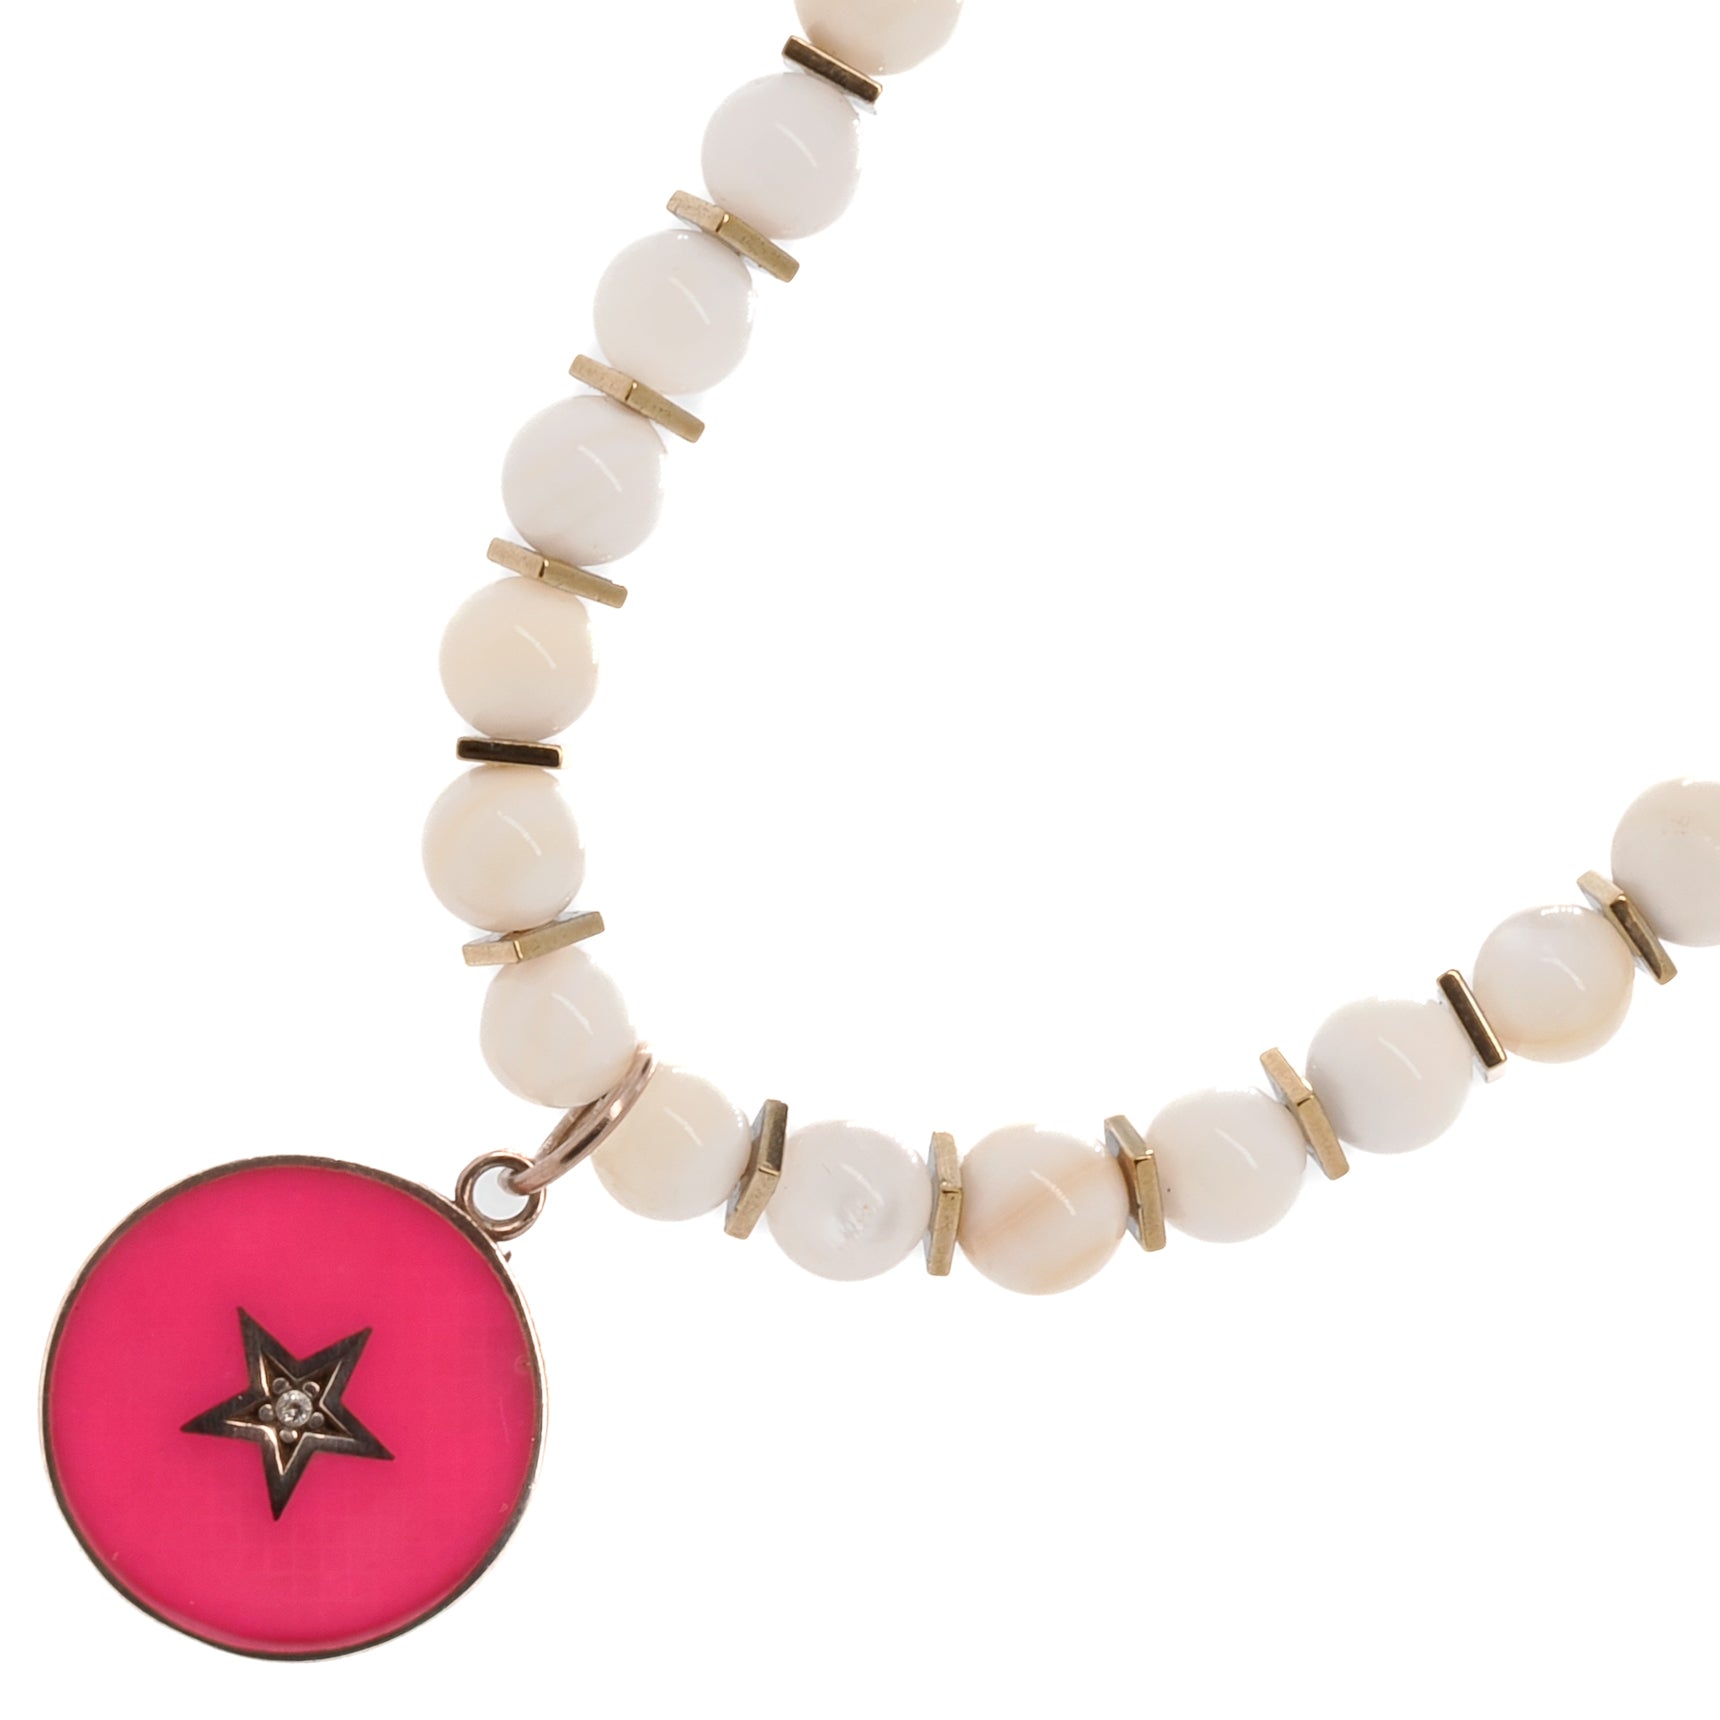 Handcrafted choker necklace featuring tridacna stones and gold hematite spacers, radiating a harmonious blend of white and pink.